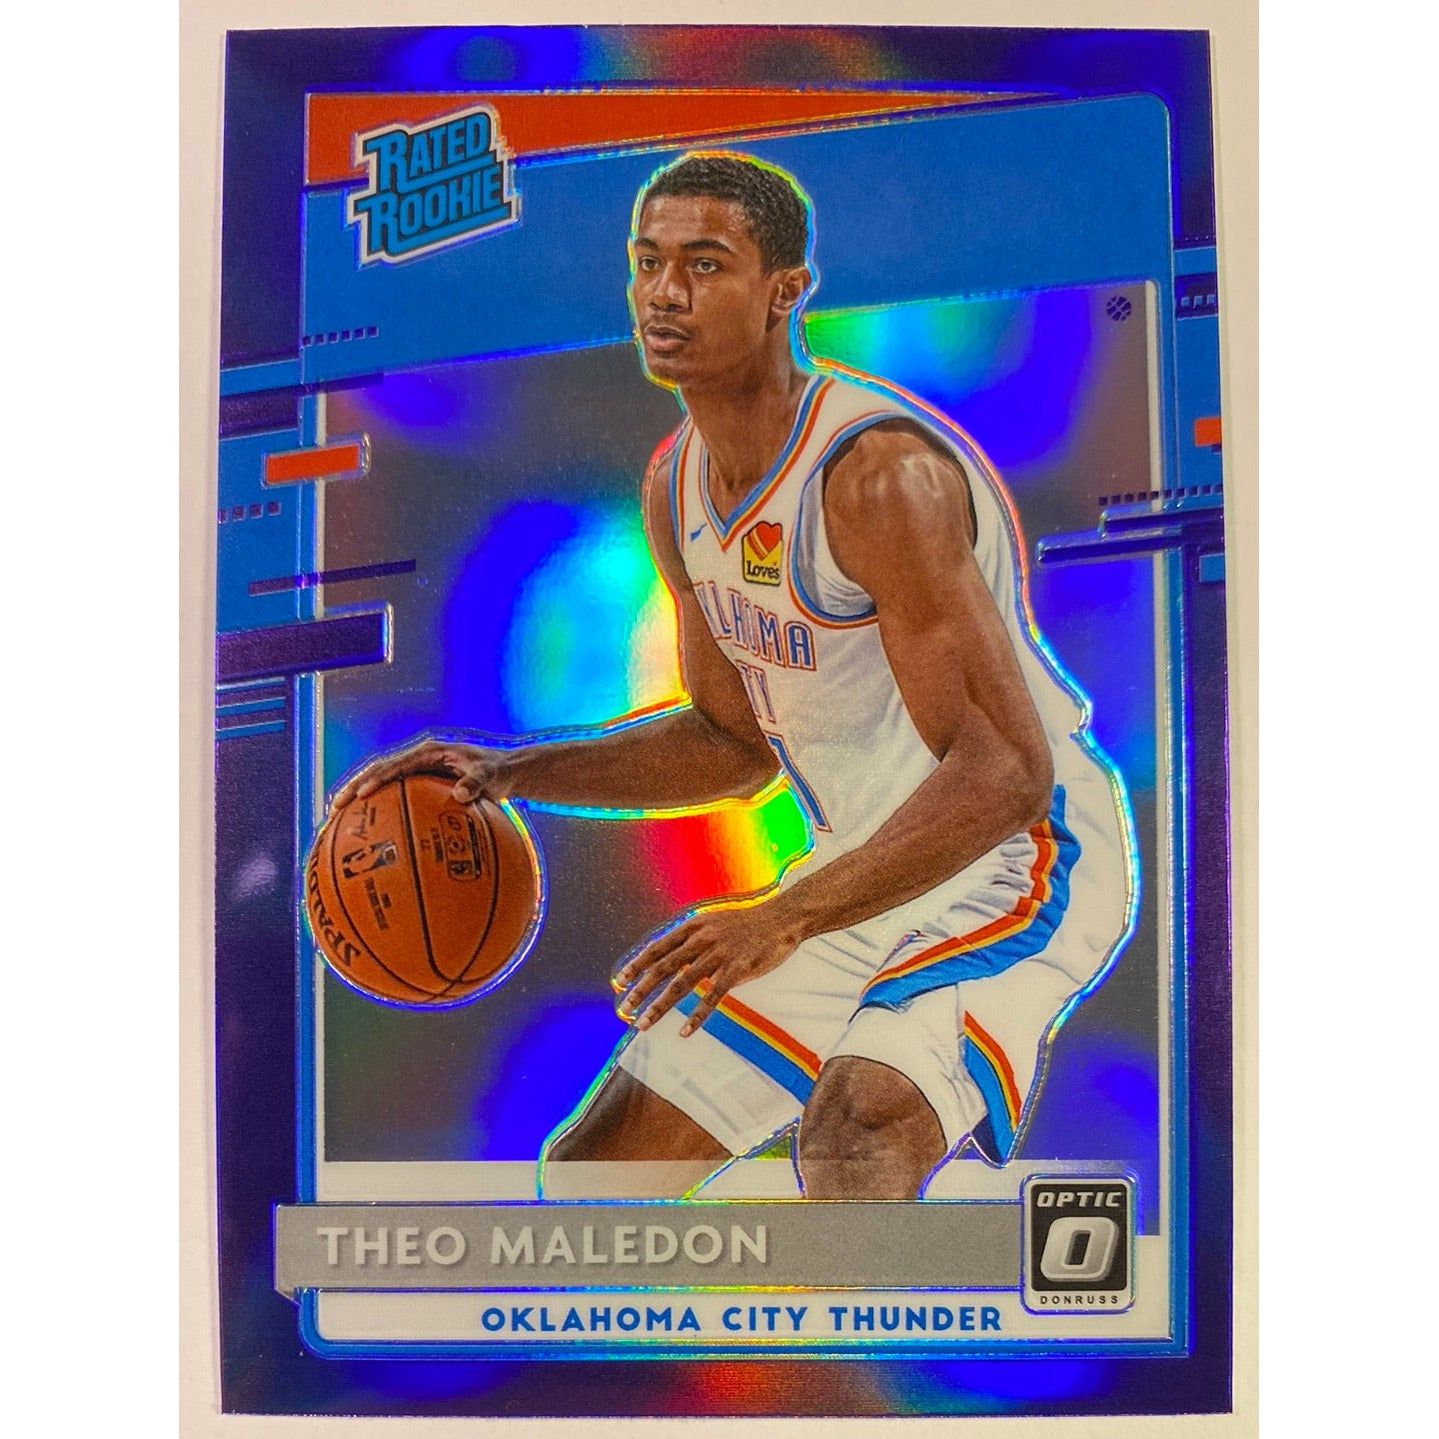  2020-21 Donruss Optic Theo Maledon Purple Holo Prizm Rated Rookie  Local Legends Cards & Collectibles